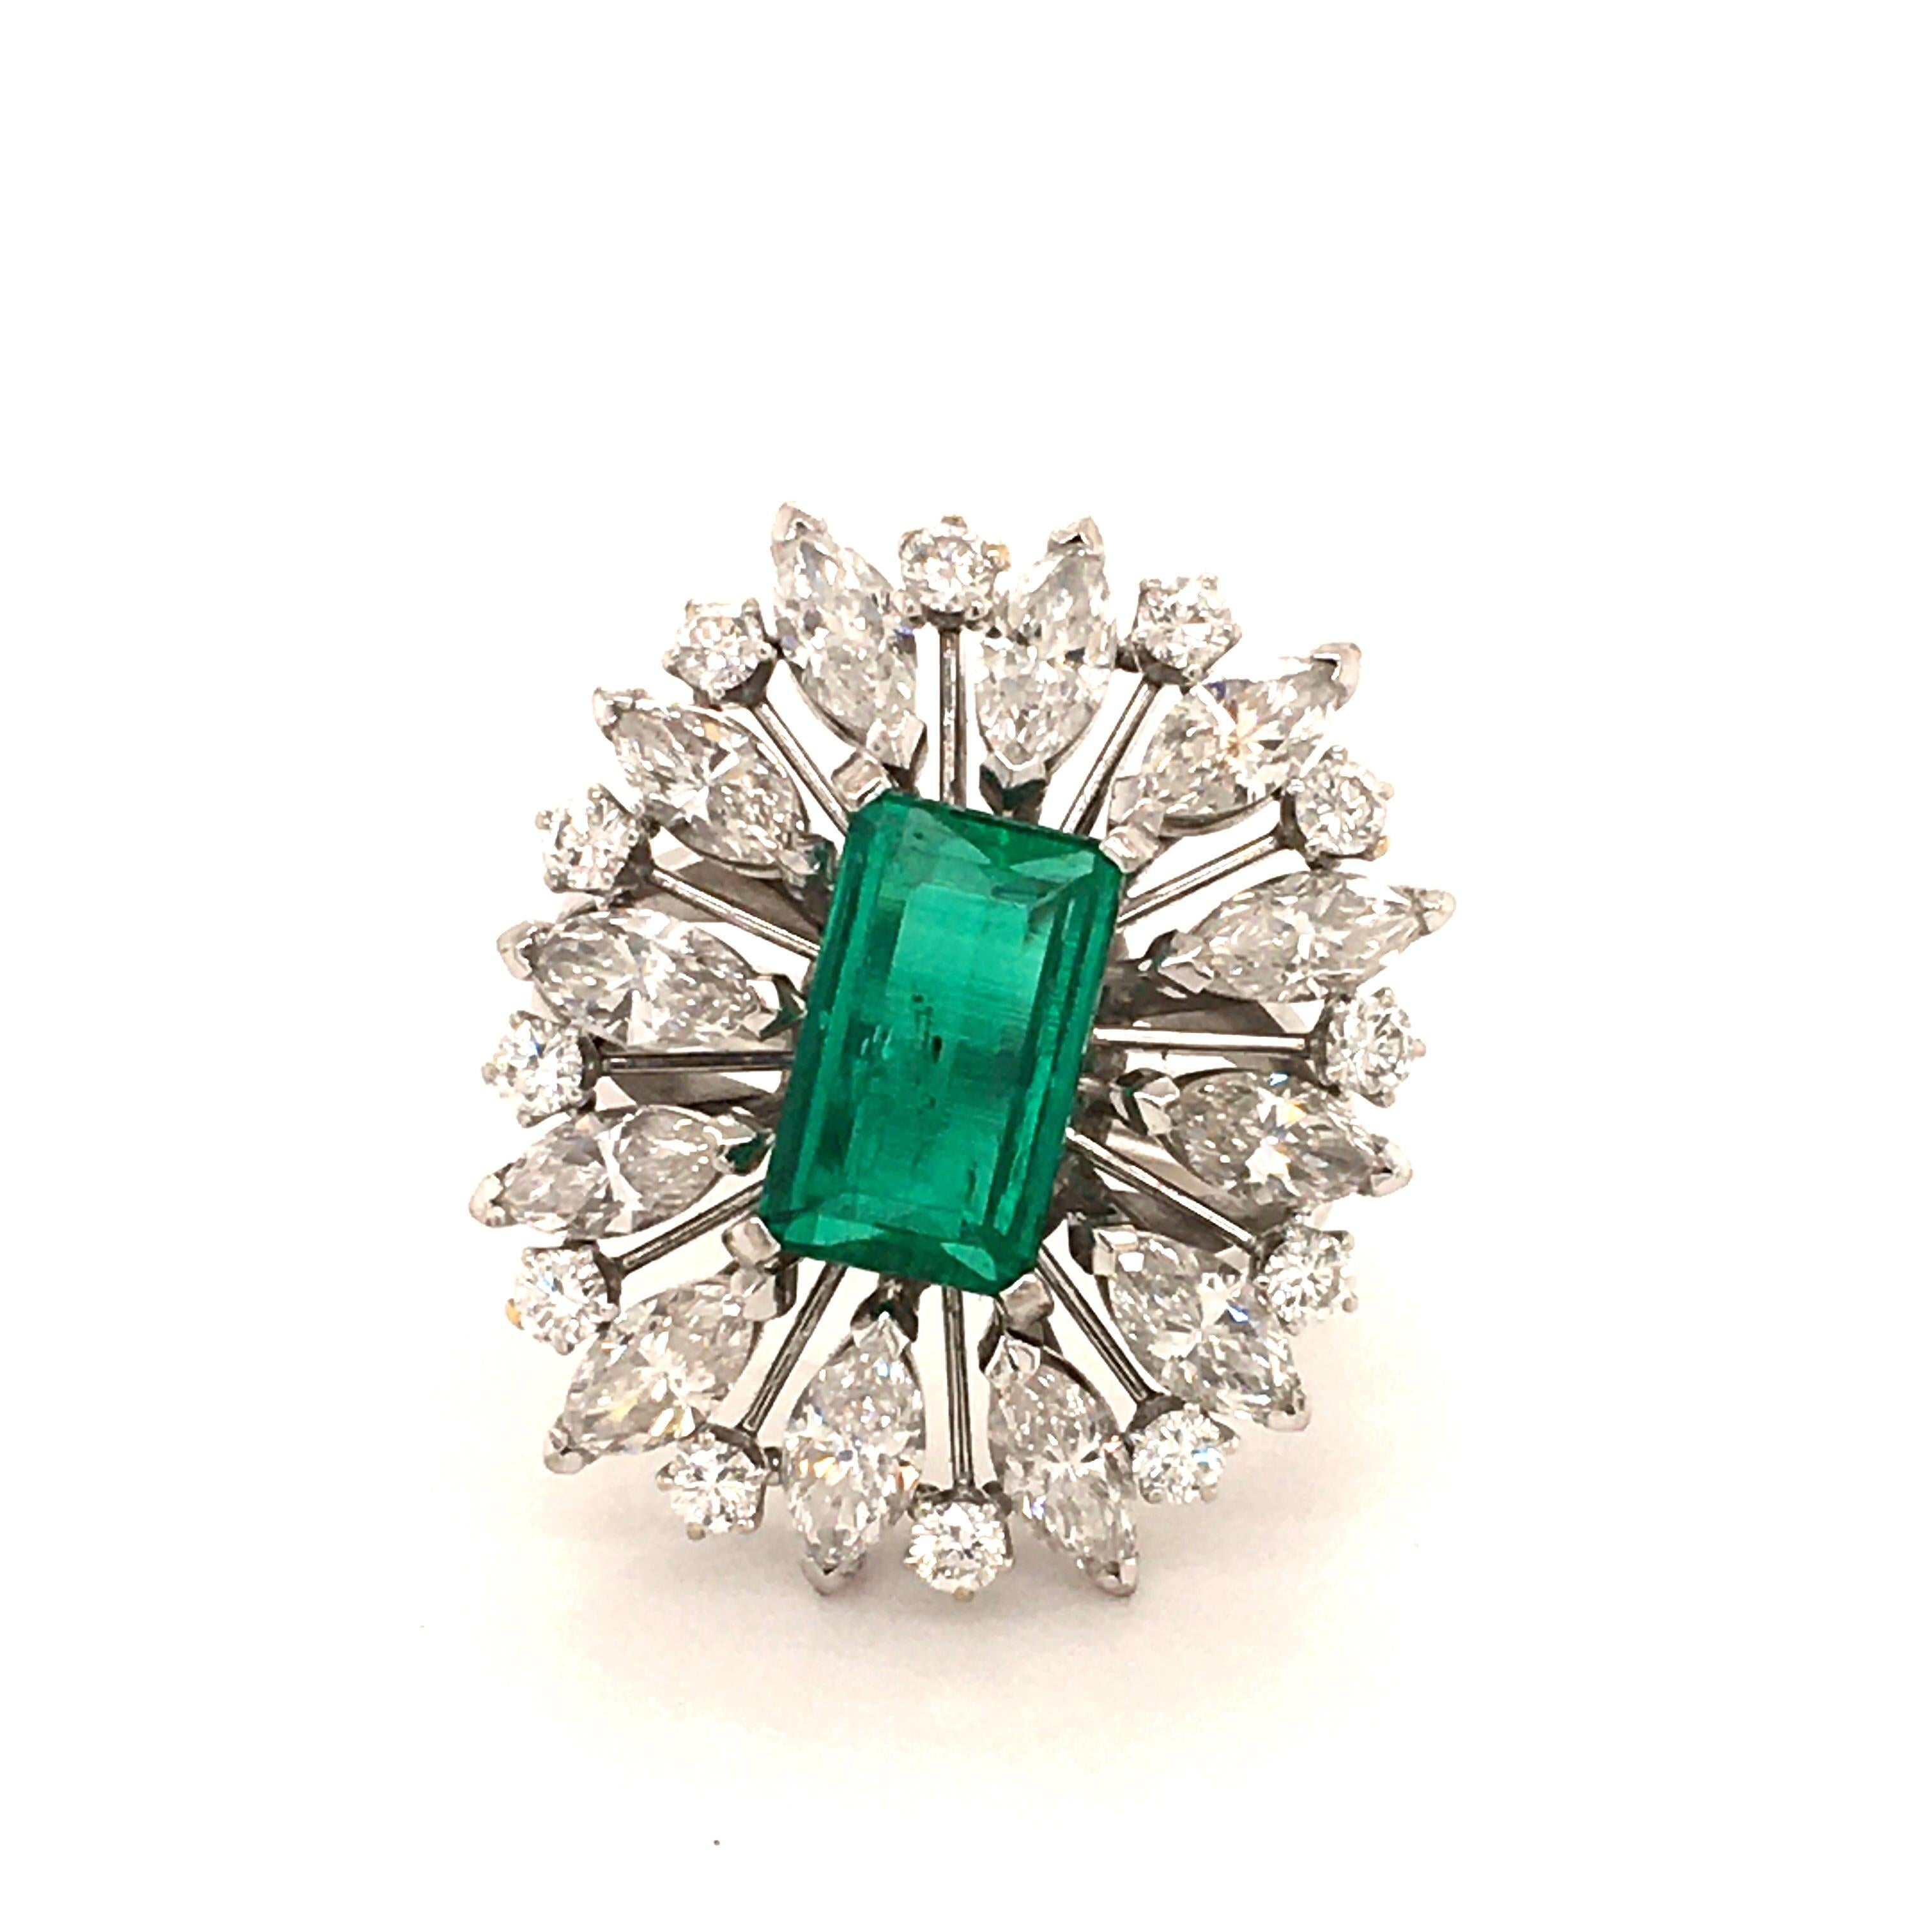 2.25 Carat Colombian Emerald and Diamond Ring in 18 Karat White Gold 1